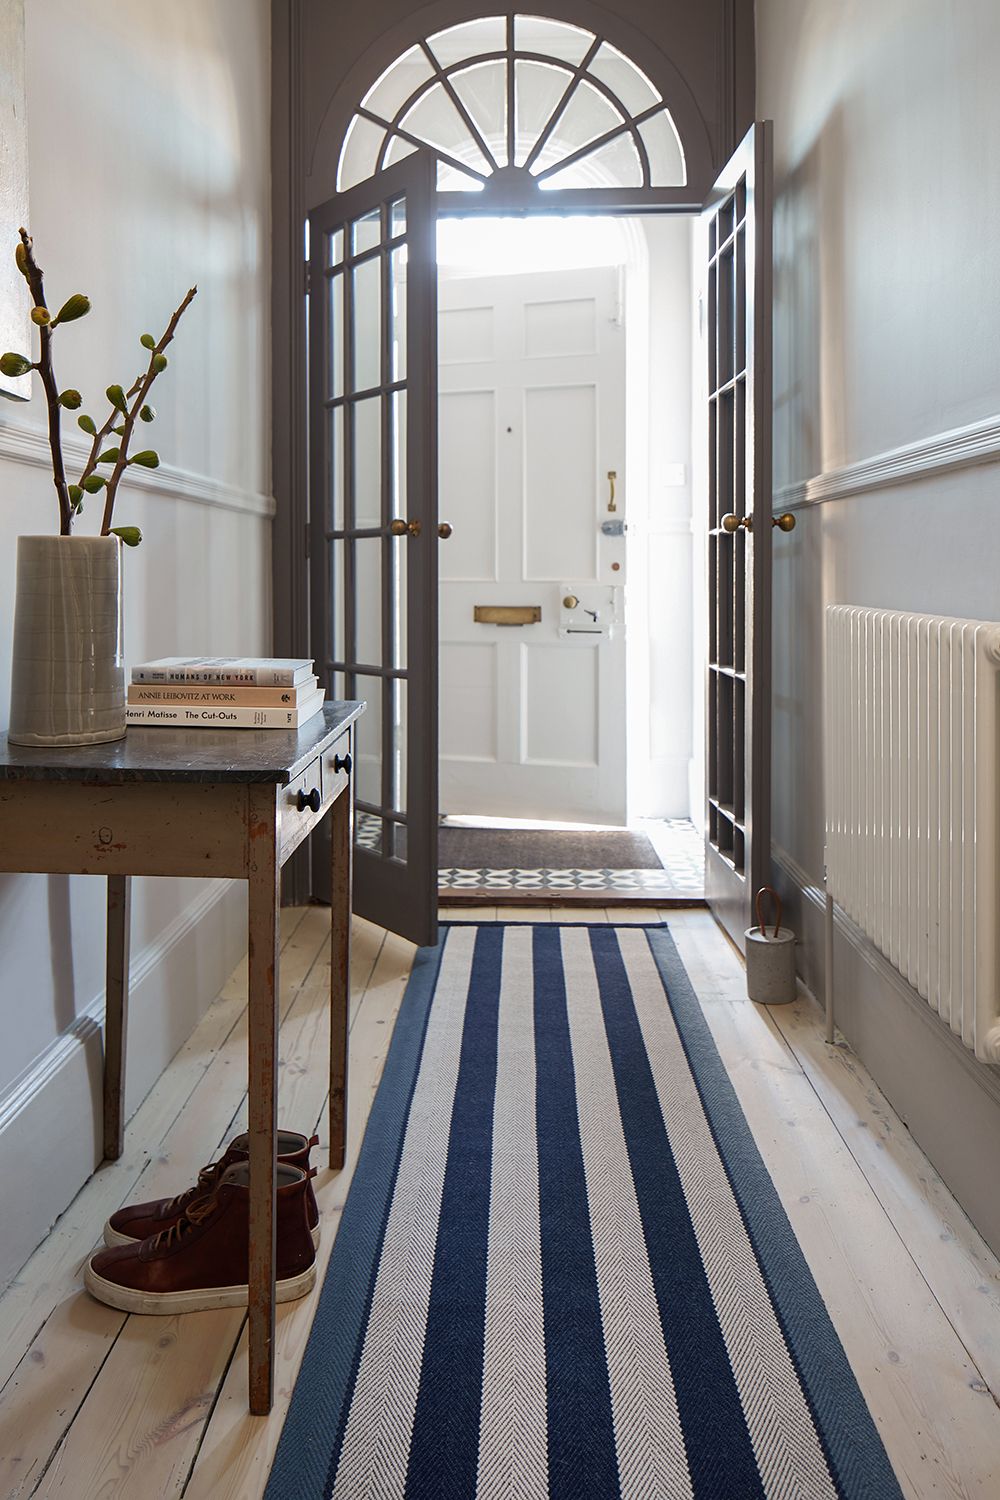 Hallway Rugs 10 Ideas To Add Style, What Type Of Rug For Entryway